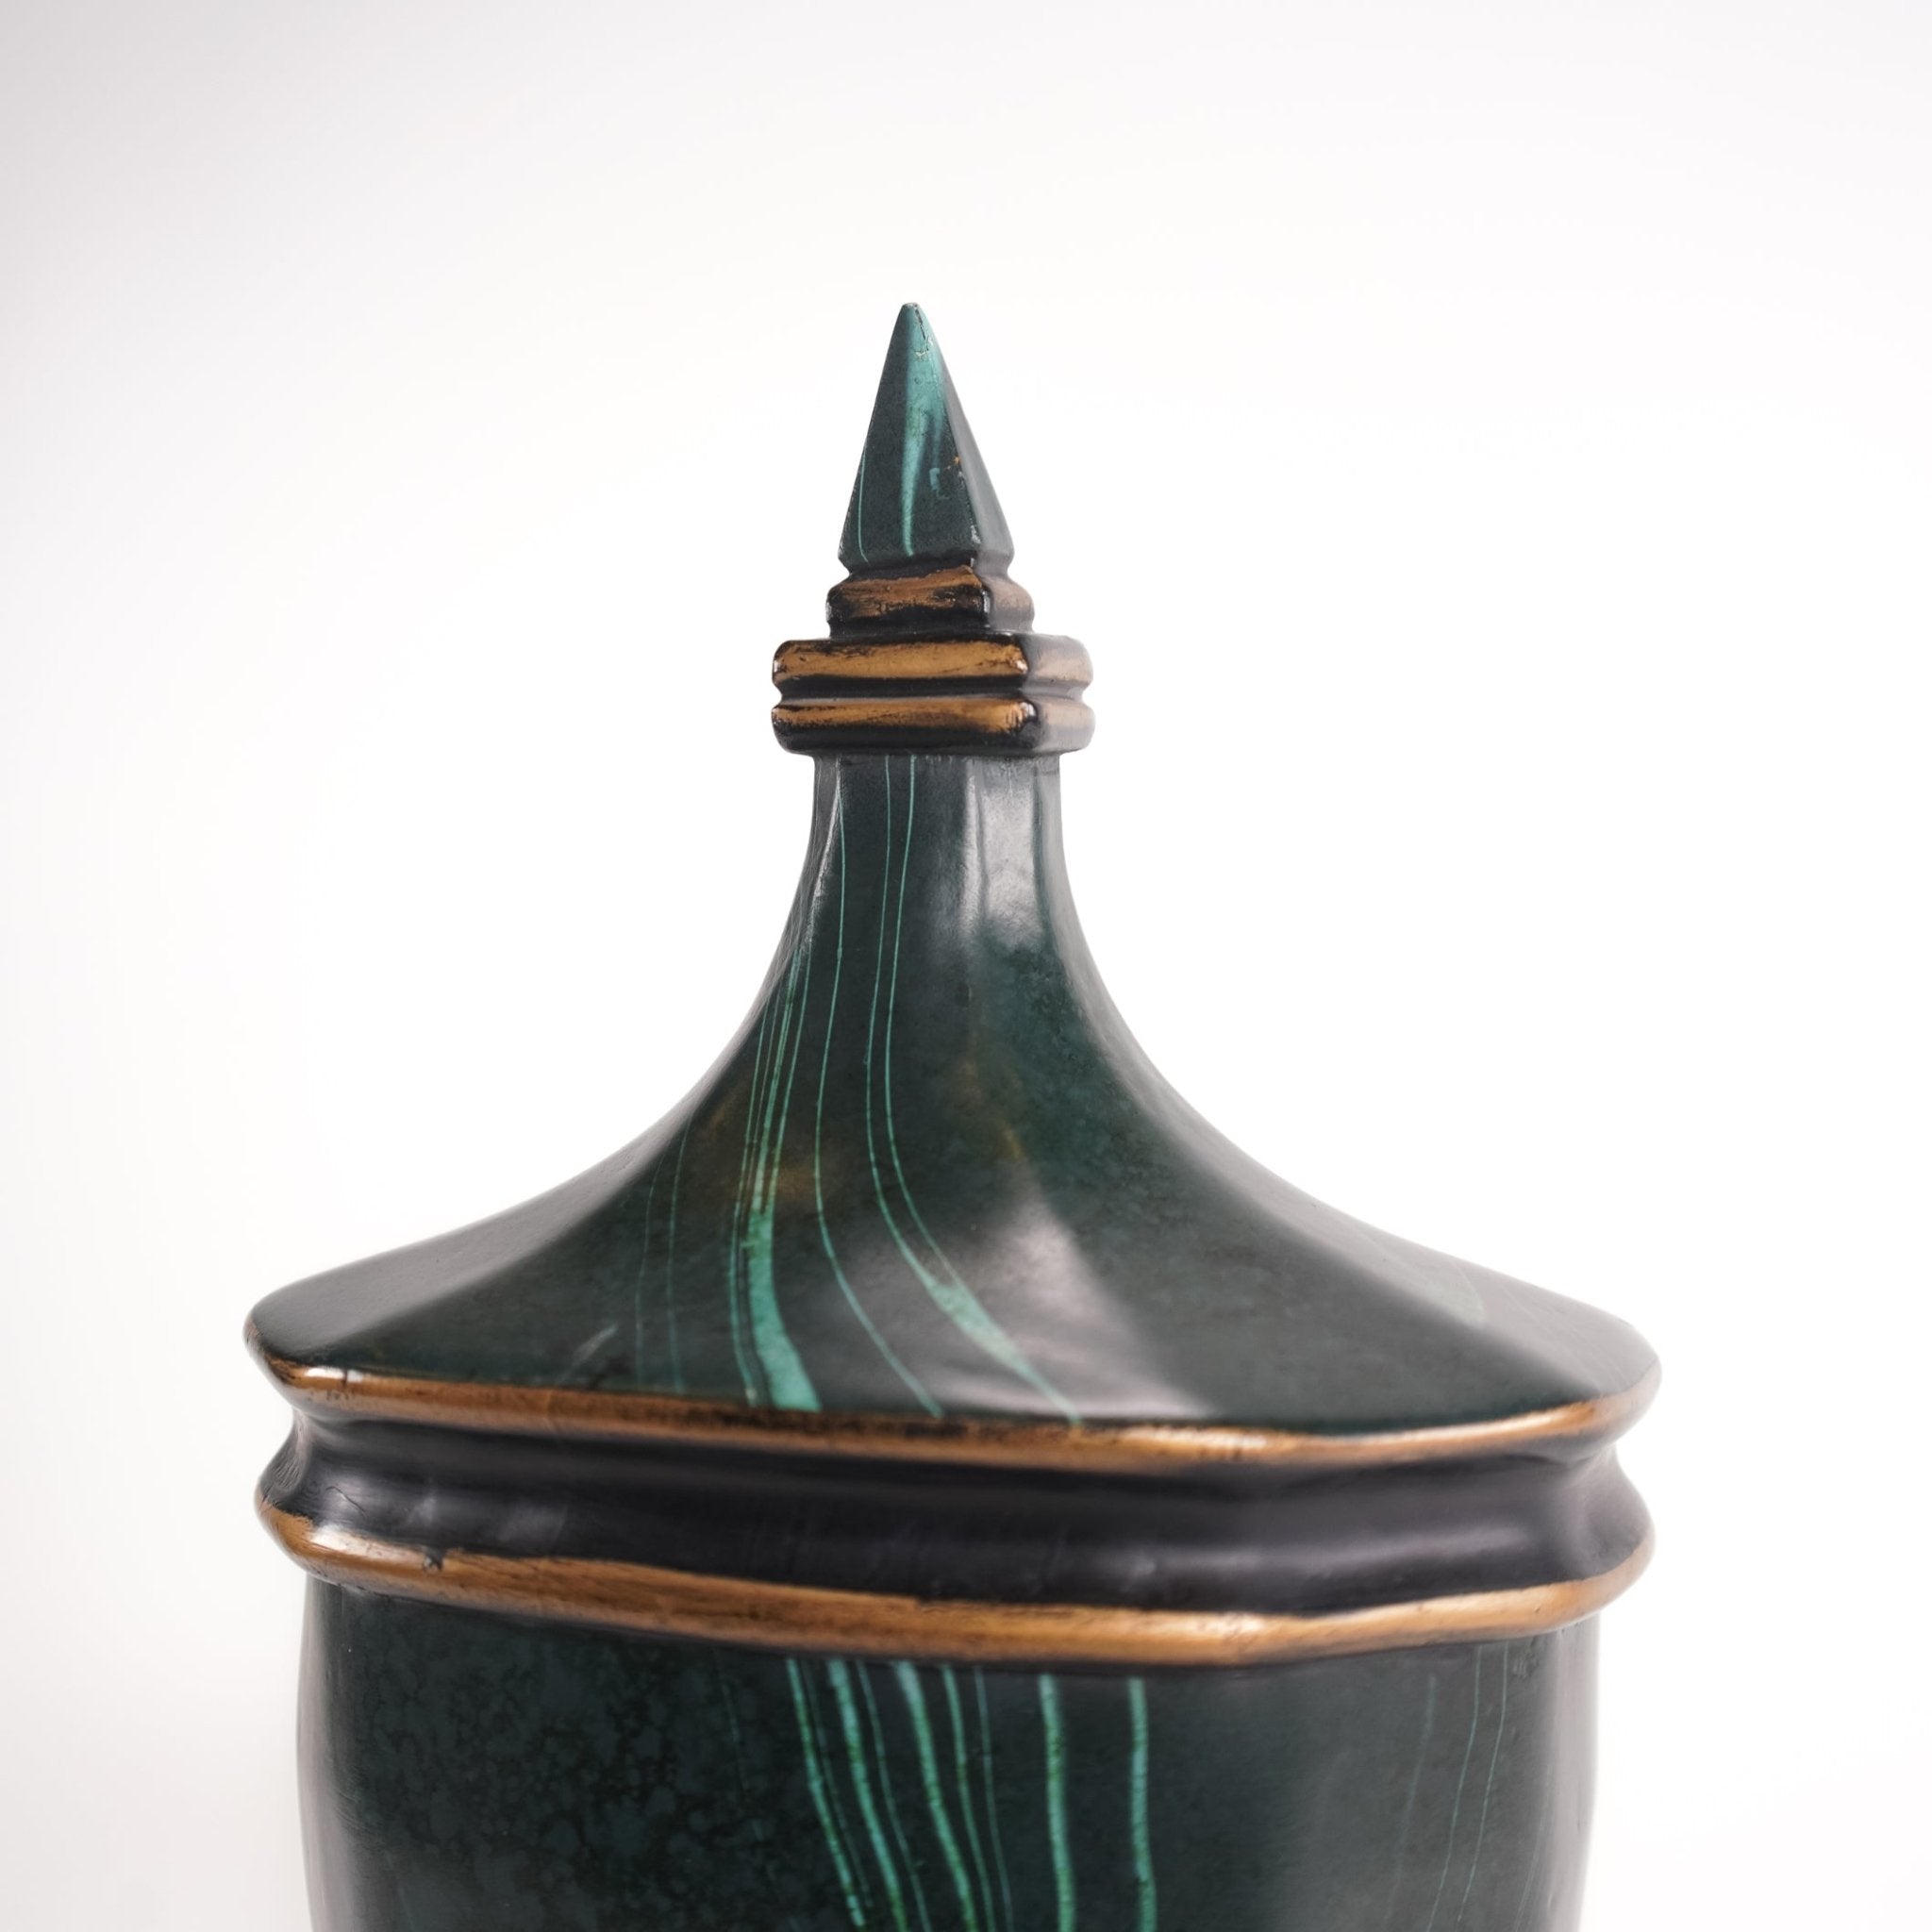 Wooden Painted Vase - Sirdab - Unknown